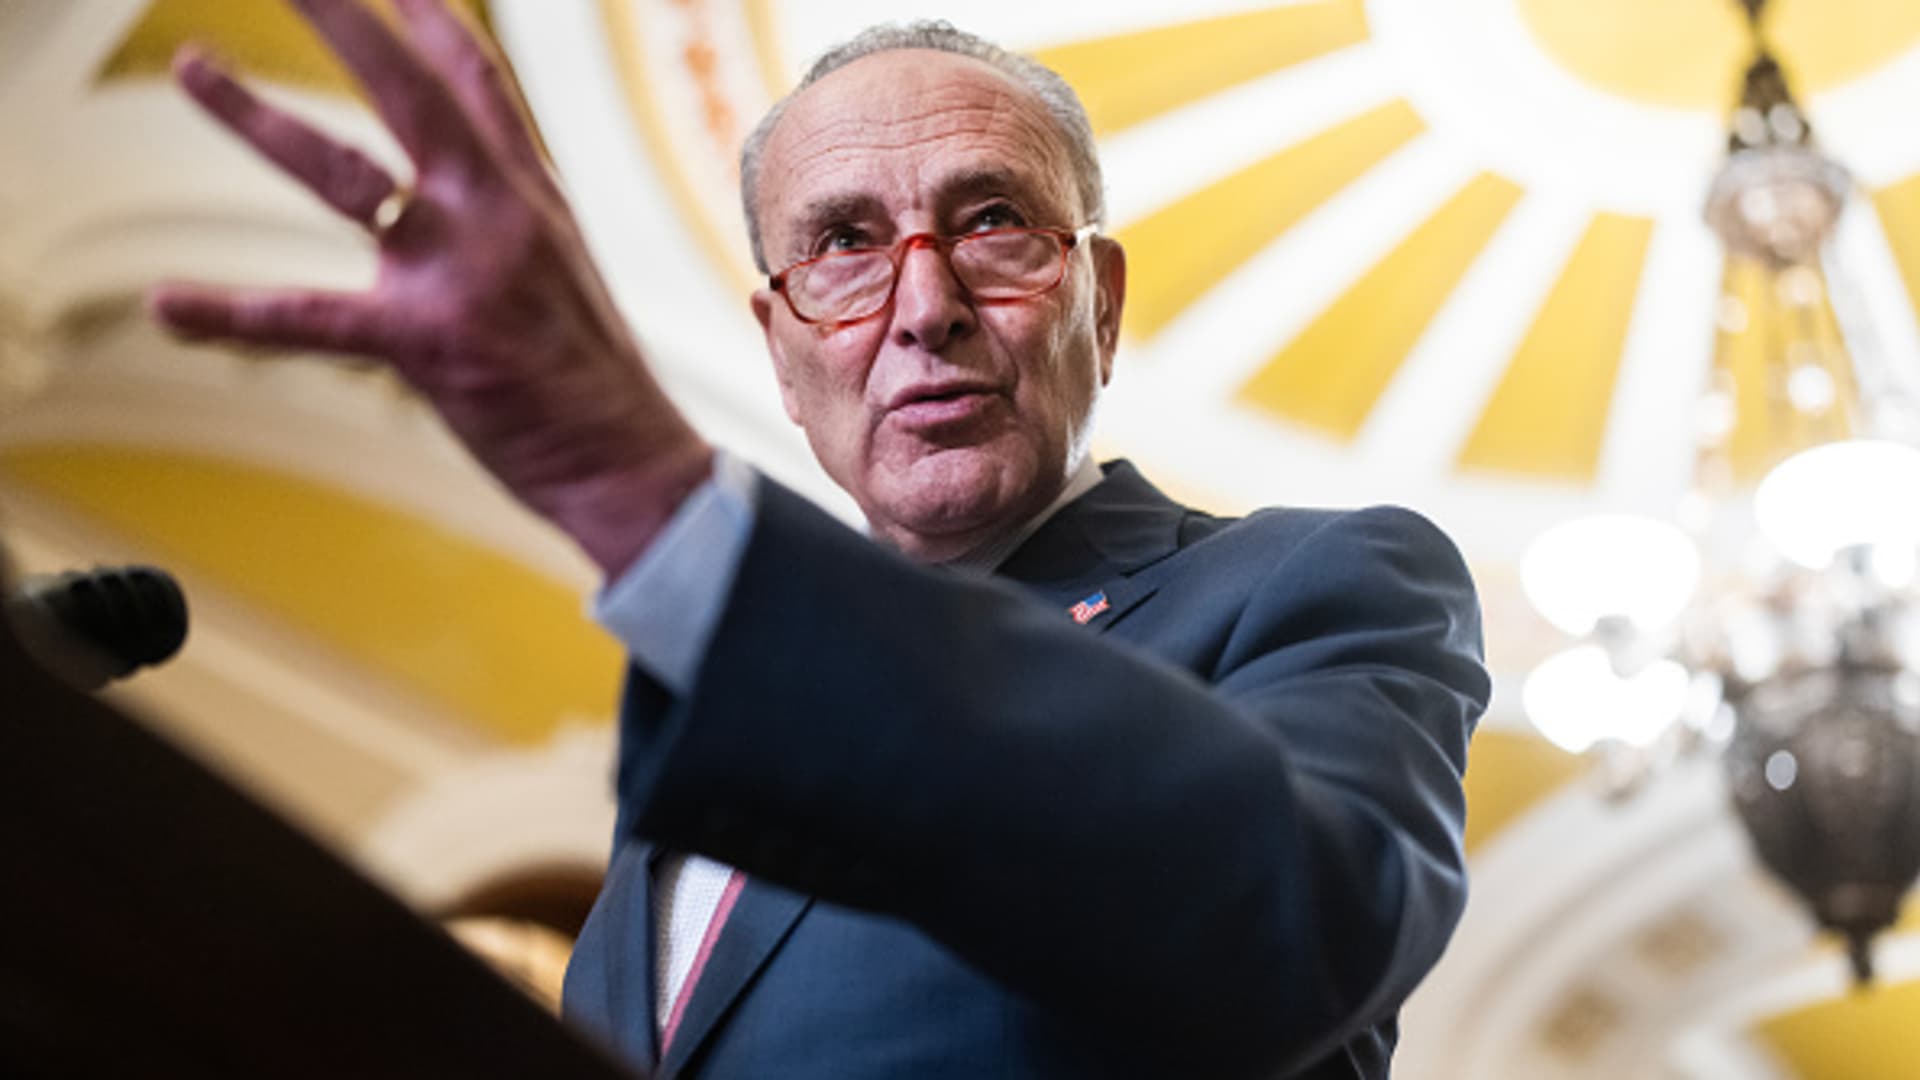 Senate Majority Leader Charles Schumer, D-N.Y., conducts a news conference after the senate luncheons in the U.S. Capitol on Wednesday, June 21, 2023.